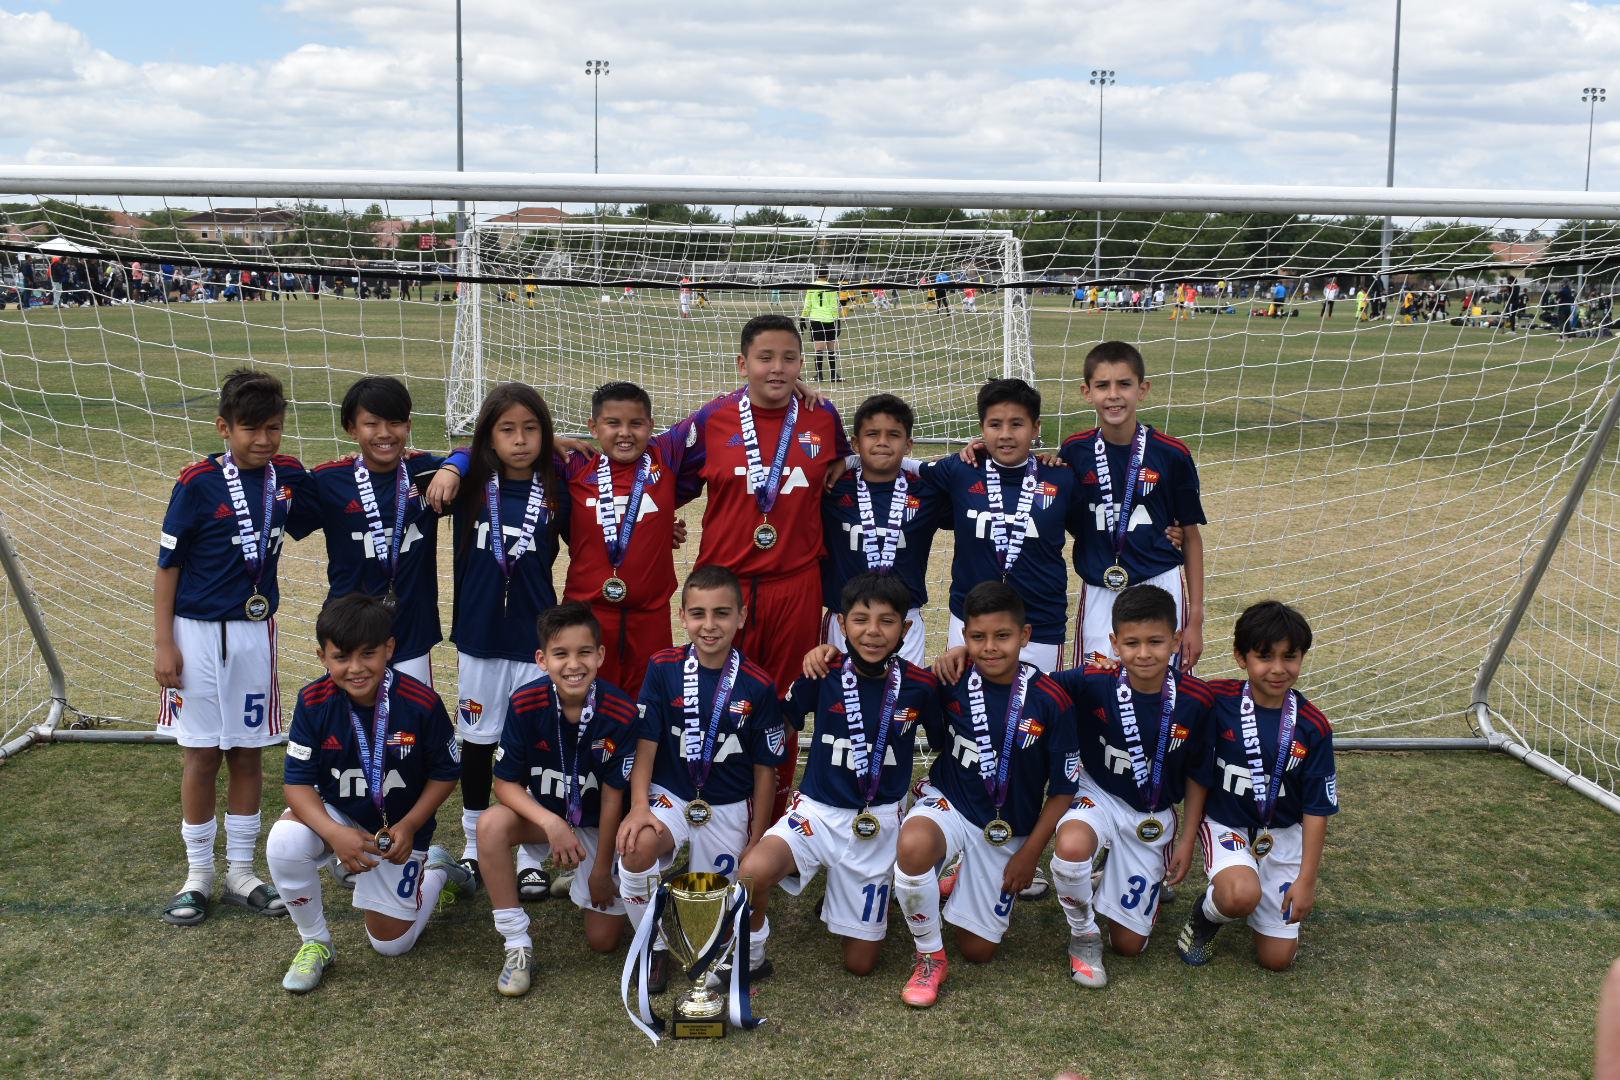 ACADEMY B2010-1: CHAMPIONS OF THE EASTER INTERNATIONAL CUP!